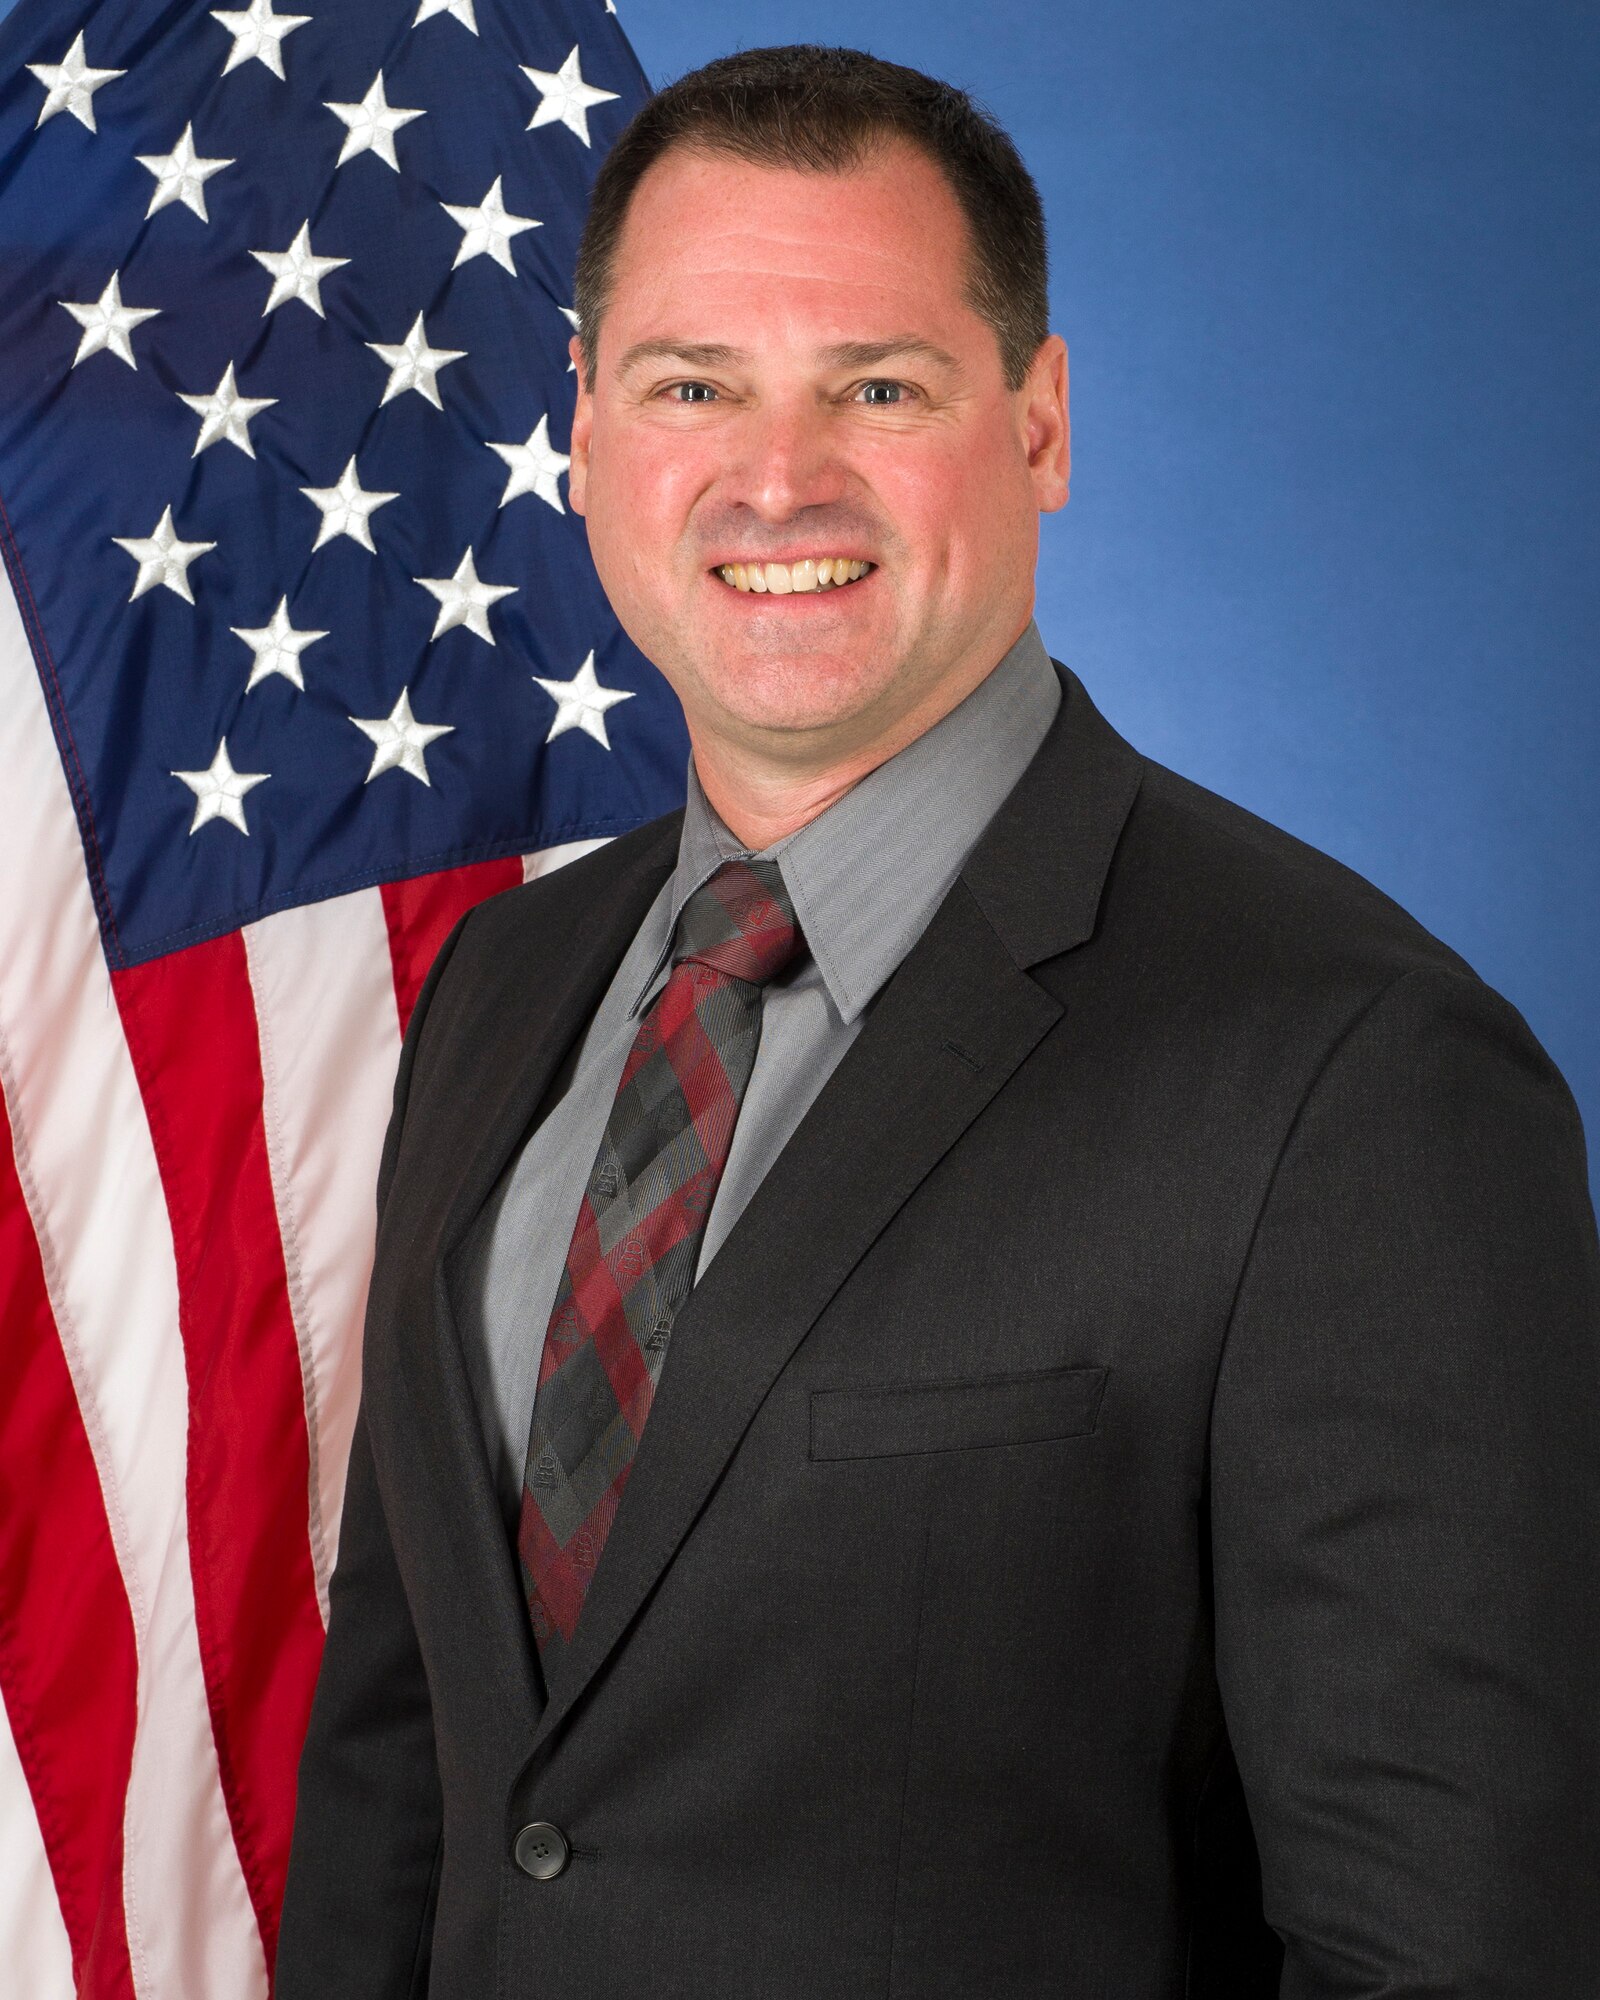 Official photo of retired U.S. Air Force Col. Dr. Paul M. Sherman, the Director of Radiological and Aerospace Medical Research at the 59th Medical Wing Chief Scientist’s Office, Defense Health Agency, Joint Base San Antonio Lackland, Texas.